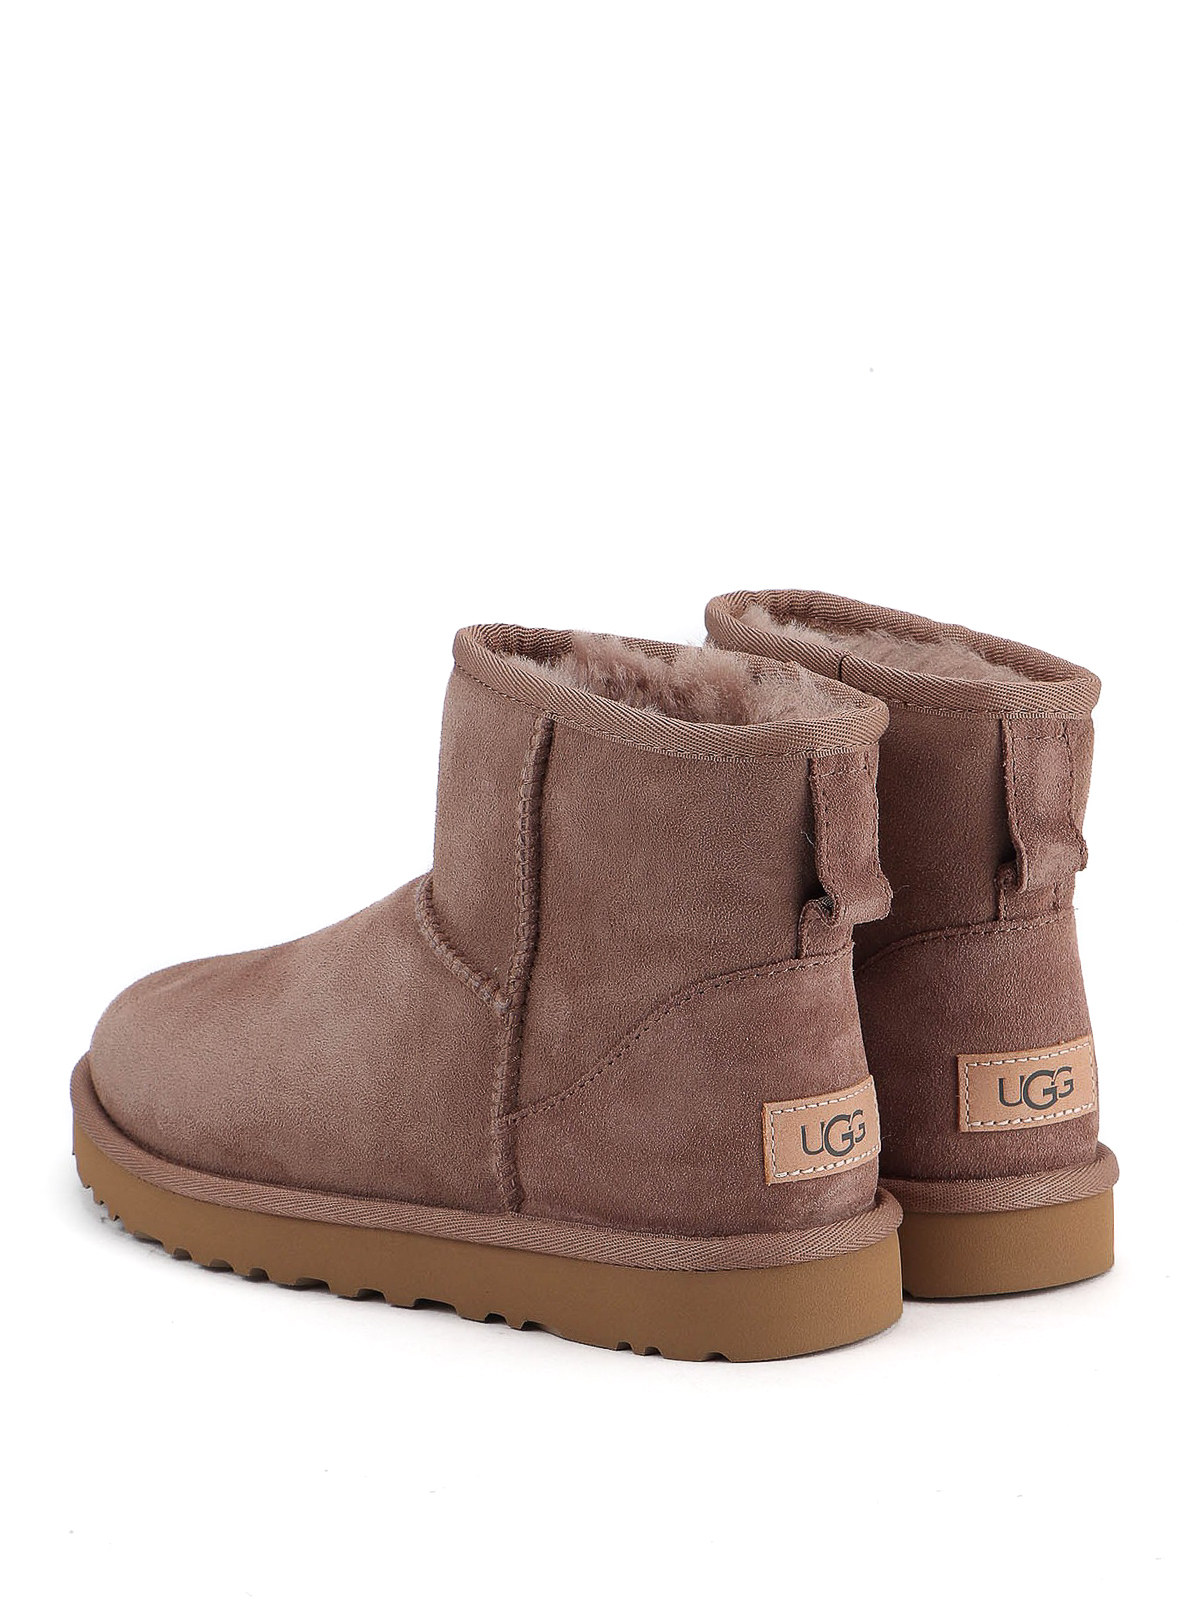 ugg low cut boots